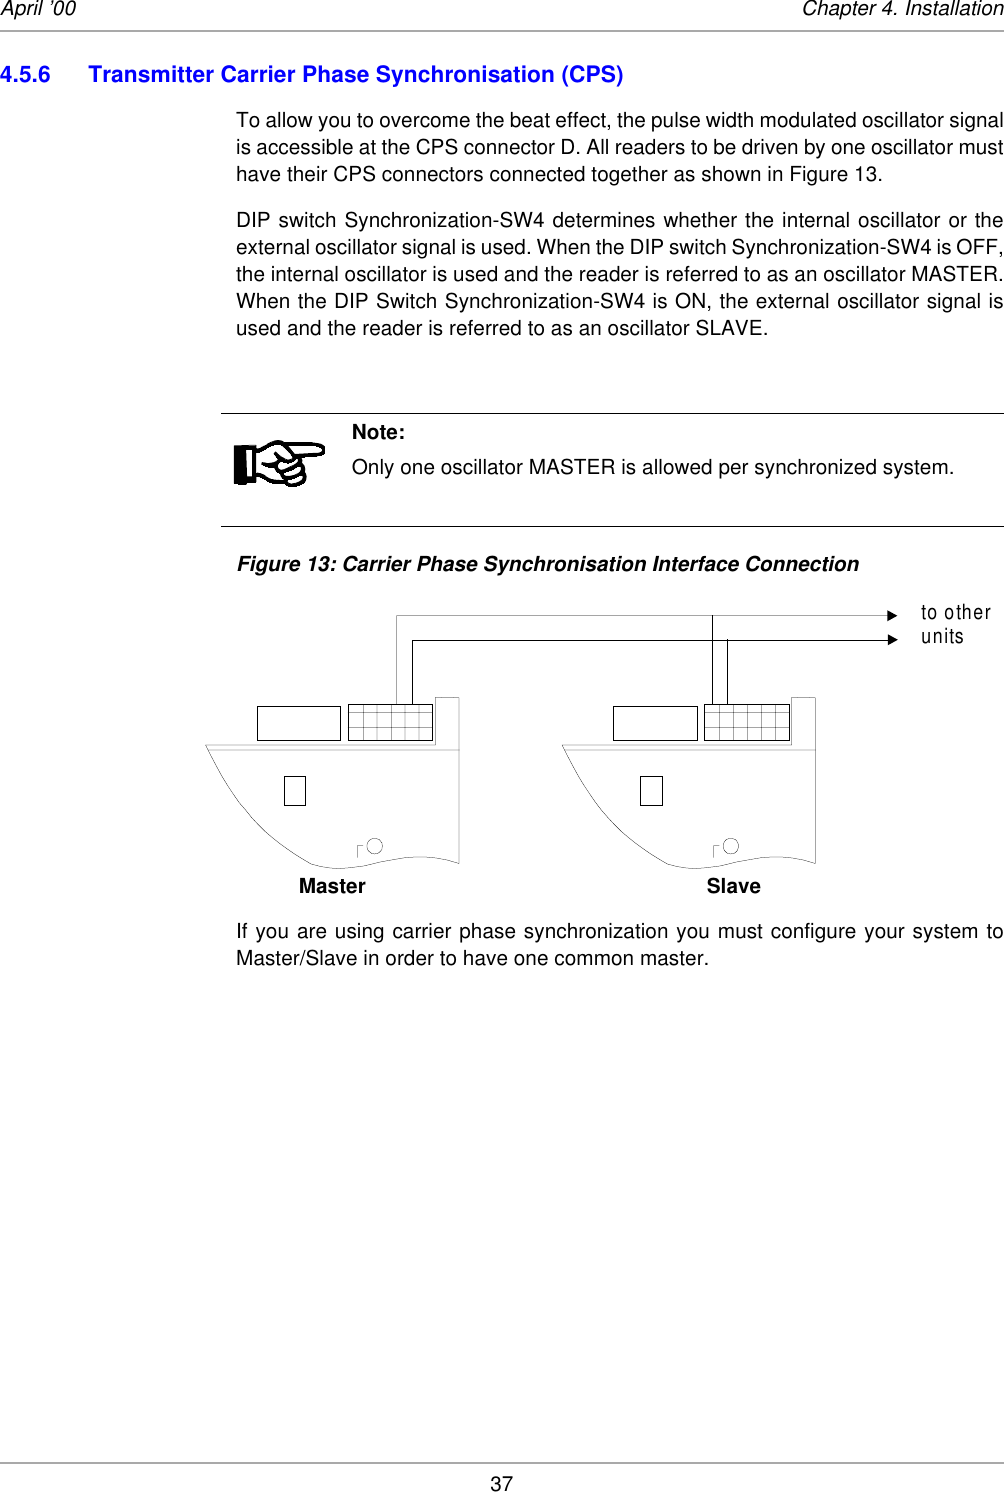 37April ’00 Chapter 4. Installation4.5.6 Transmitter Carrier Phase Synchronisation (CPS)To allow you to overcome the beat effect, the pulse width modulated oscillator signalis accessible at the CPS connector D. All readers to be driven by one oscillator musthave their CPS connectors connected together as shown in Figure 13. DIP switch Synchronization-SW4 determines whether the internal oscillator or theexternal oscillator signal is used. When the DIP switch Synchronization-SW4 is OFF,the internal oscillator is used and the reader is referred to as an oscillator MASTER.When the DIP Switch Synchronization-SW4 is ON, the external oscillator signal isused and the reader is referred to as an oscillator SLAVE. Figure 13: Carrier Phase Synchronisation Interface ConnectionMaster SlaveIf you are using carrier phase synchronization you must configure your system toMaster/Slave in order to have one common master. Note:Only one oscillator MASTER is allowed per synchronized system.to otherunits